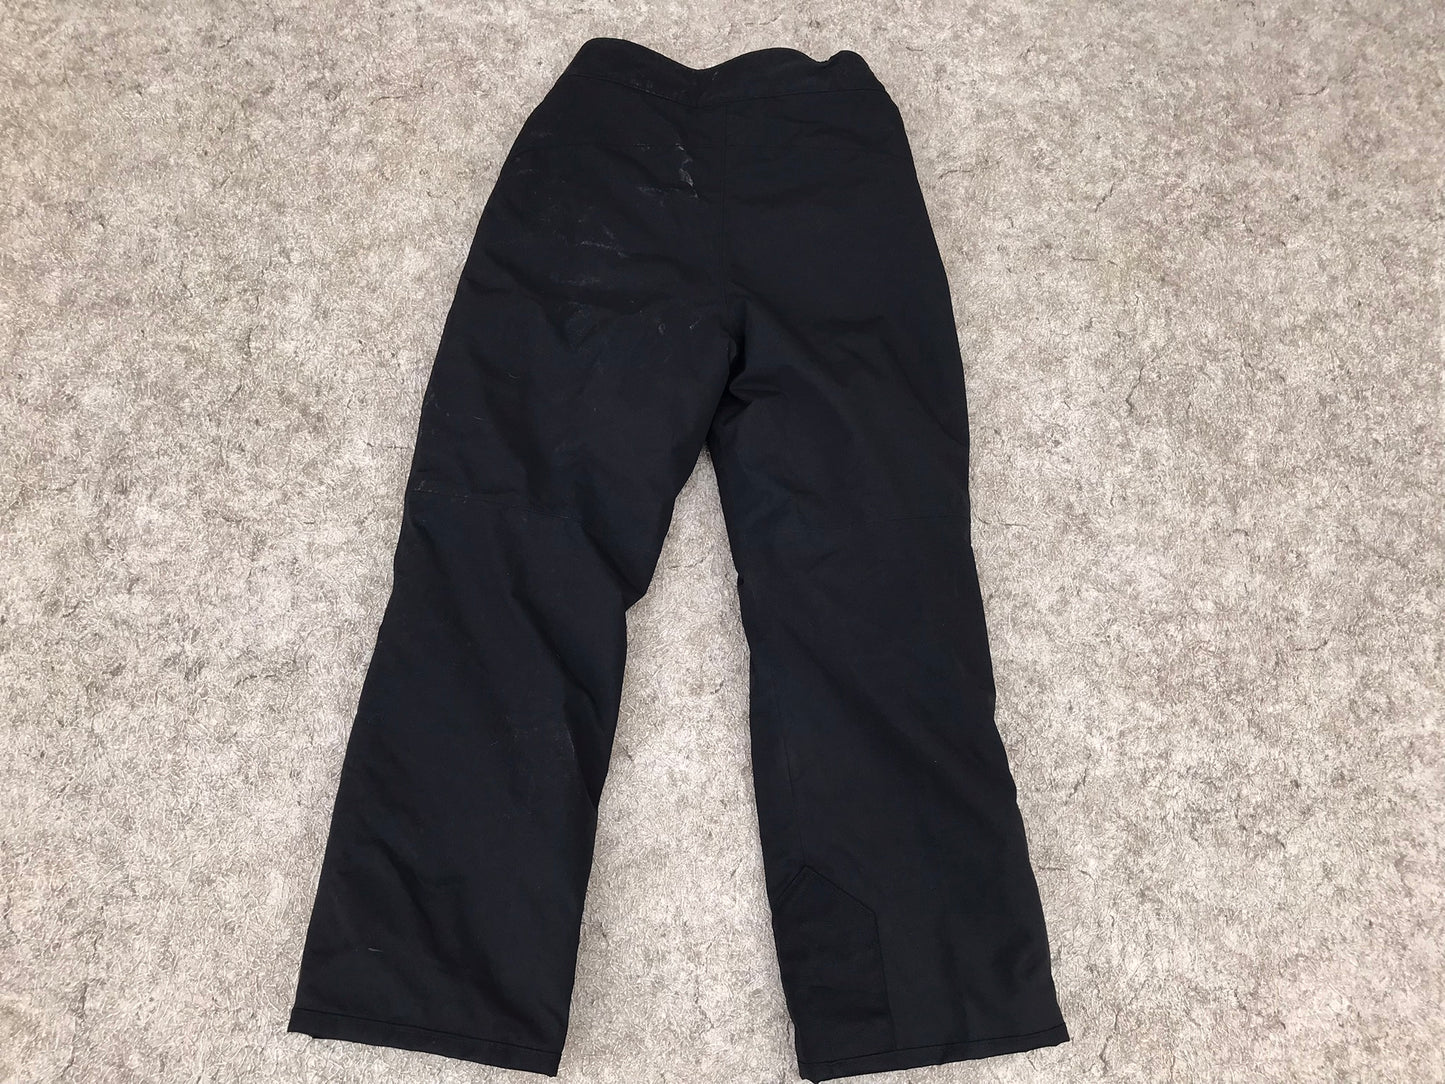 Snow Pants Child Size 14-16 Youth The North Face DRYvent Snowboarding Black As New Outstanding Quality